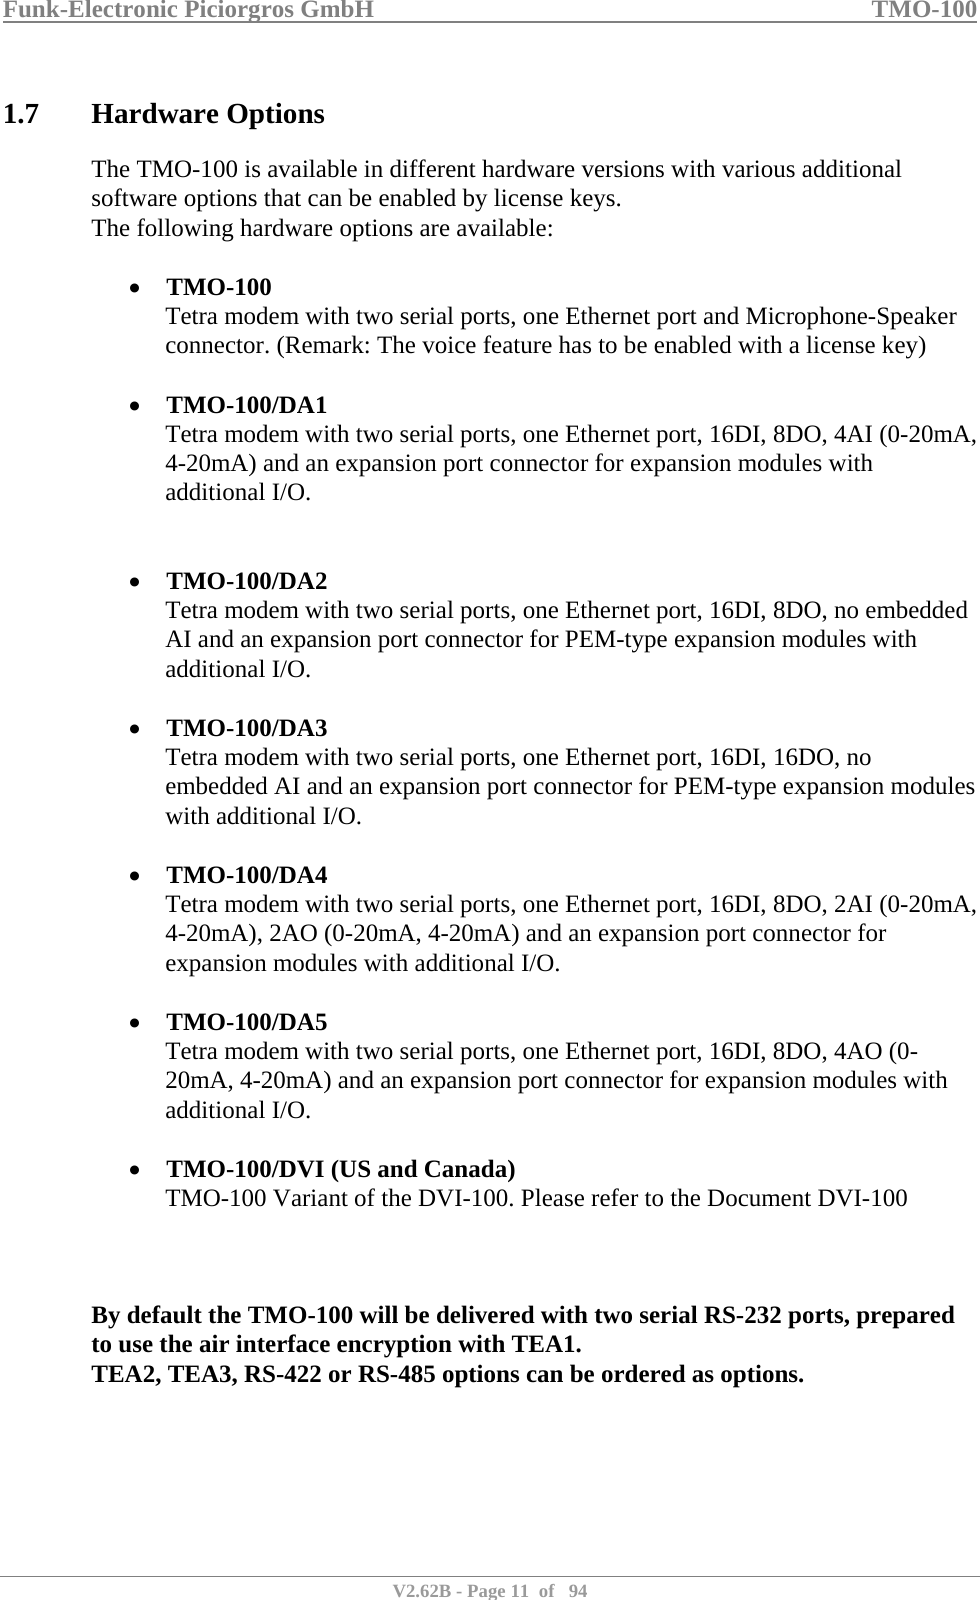 Funk-Electronic Piciorgros GmbH   TMO-100   V2.62B - Page 11  of   94   1.7 Hardware Options The TMO-100 is available in different hardware versions with various additional software options that can be enabled by license keys. The following hardware options are available:  • TMO-100 Tetra modem with two serial ports, one Ethernet port and Microphone-Speaker connector. (Remark: The voice feature has to be enabled with a license key)  • TMO-100/DA1 Tetra modem with two serial ports, one Ethernet port, 16DI, 8DO, 4AI (0-20mA, 4-20mA) and an expansion port connector for expansion modules with additional I/O.   • TMO-100/DA2 Tetra modem with two serial ports, one Ethernet port, 16DI, 8DO, no embedded AI and an expansion port connector for PEM-type expansion modules with additional I/O.  • TMO-100/DA3 Tetra modem with two serial ports, one Ethernet port, 16DI, 16DO, no embedded AI and an expansion port connector for PEM-type expansion modules with additional I/O.  • TMO-100/DA4 Tetra modem with two serial ports, one Ethernet port, 16DI, 8DO, 2AI (0-20mA, 4-20mA), 2AO (0-20mA, 4-20mA) and an expansion port connector for expansion modules with additional I/O.  • TMO-100/DA5 Tetra modem with two serial ports, one Ethernet port, 16DI, 8DO, 4AO (0-20mA, 4-20mA) and an expansion port connector for expansion modules with additional I/O.  • TMO-100/DVI (US and Canada) TMO-100 Variant of the DVI-100. Please refer to the Document DVI-100    By default the TMO-100 will be delivered with two serial RS-232 ports, prepared to use the air interface encryption with TEA1.  TEA2, TEA3, RS-422 or RS-485 options can be ordered as options.    